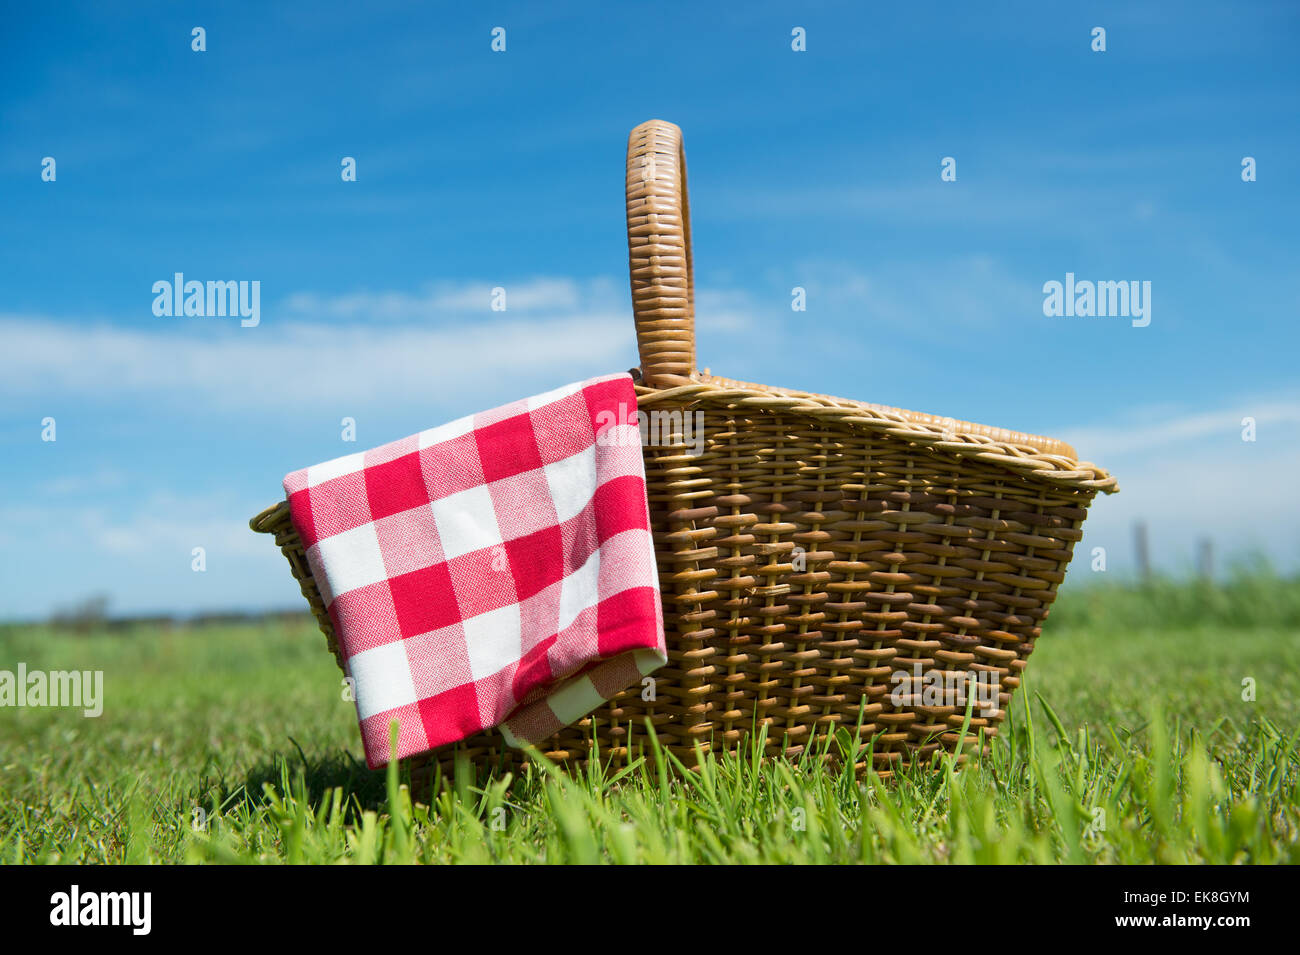 Picnic basket in grass outdoor Stock Photo